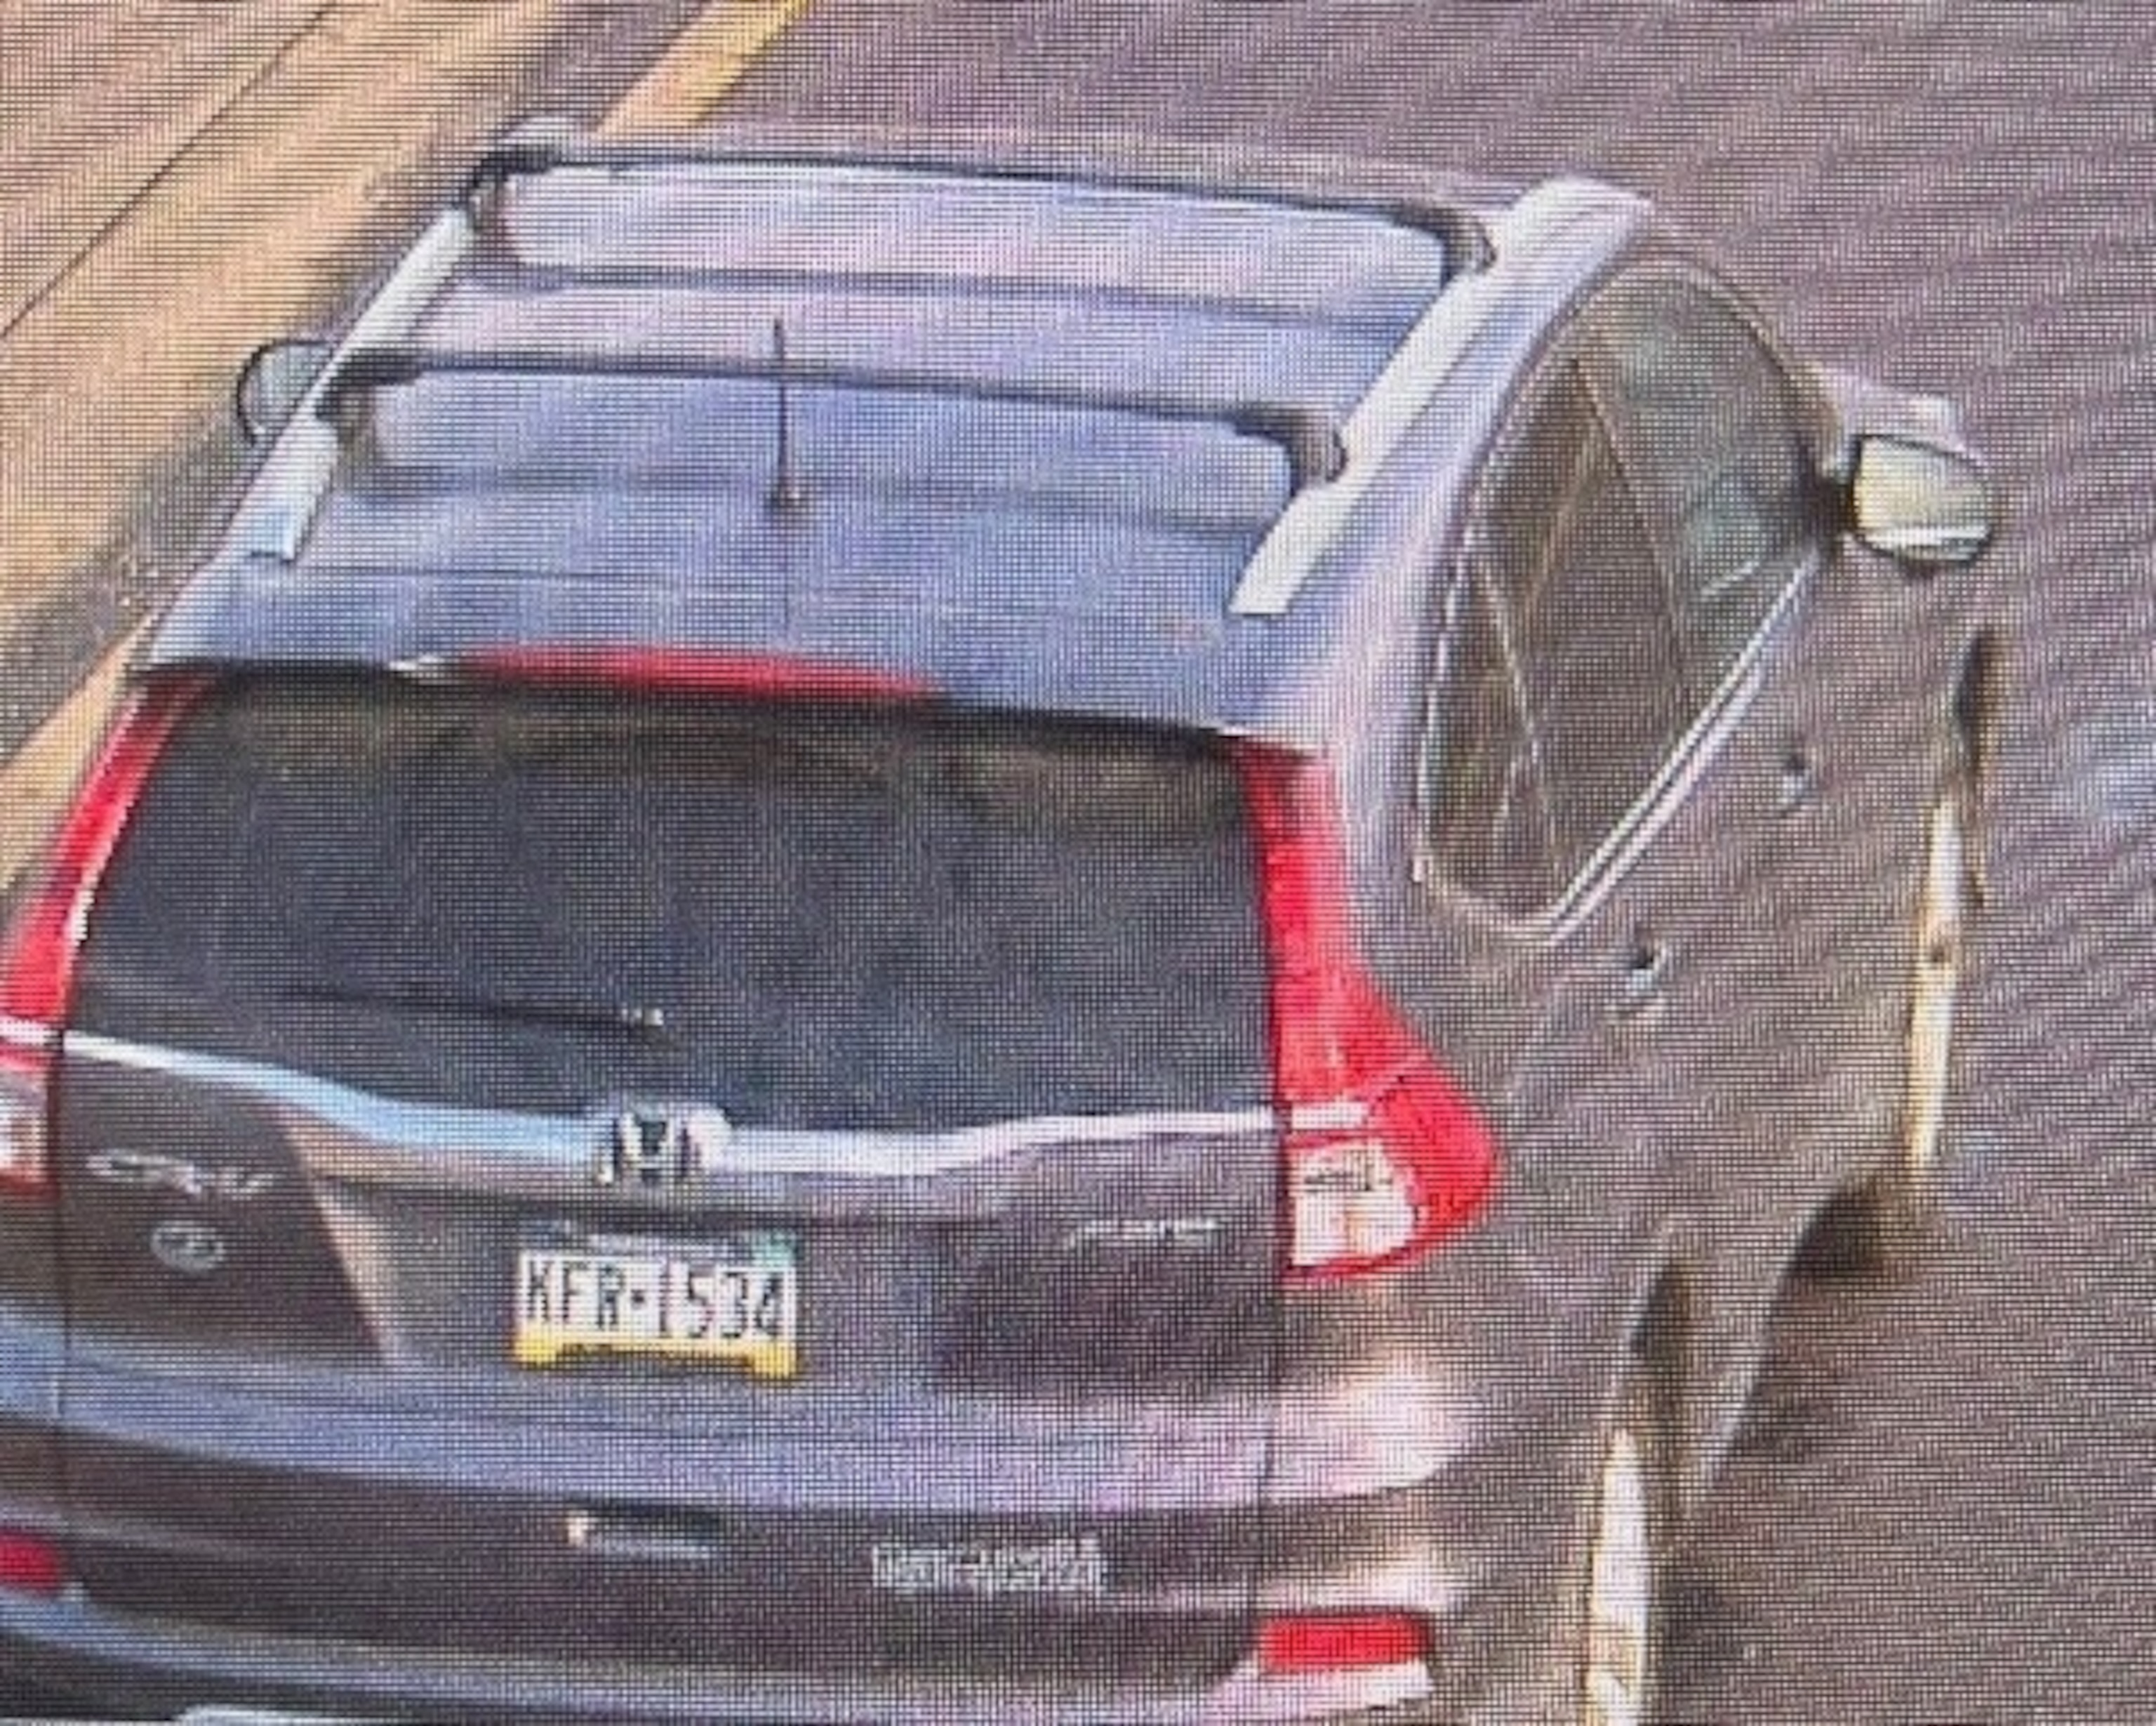 PHOTO: Police said Andre Gordon was last seen driving a 2016 dark gray Honda CRV with Pennsylvania registration KFR 1534, seen in a photo released by the Falls Township Police Department.